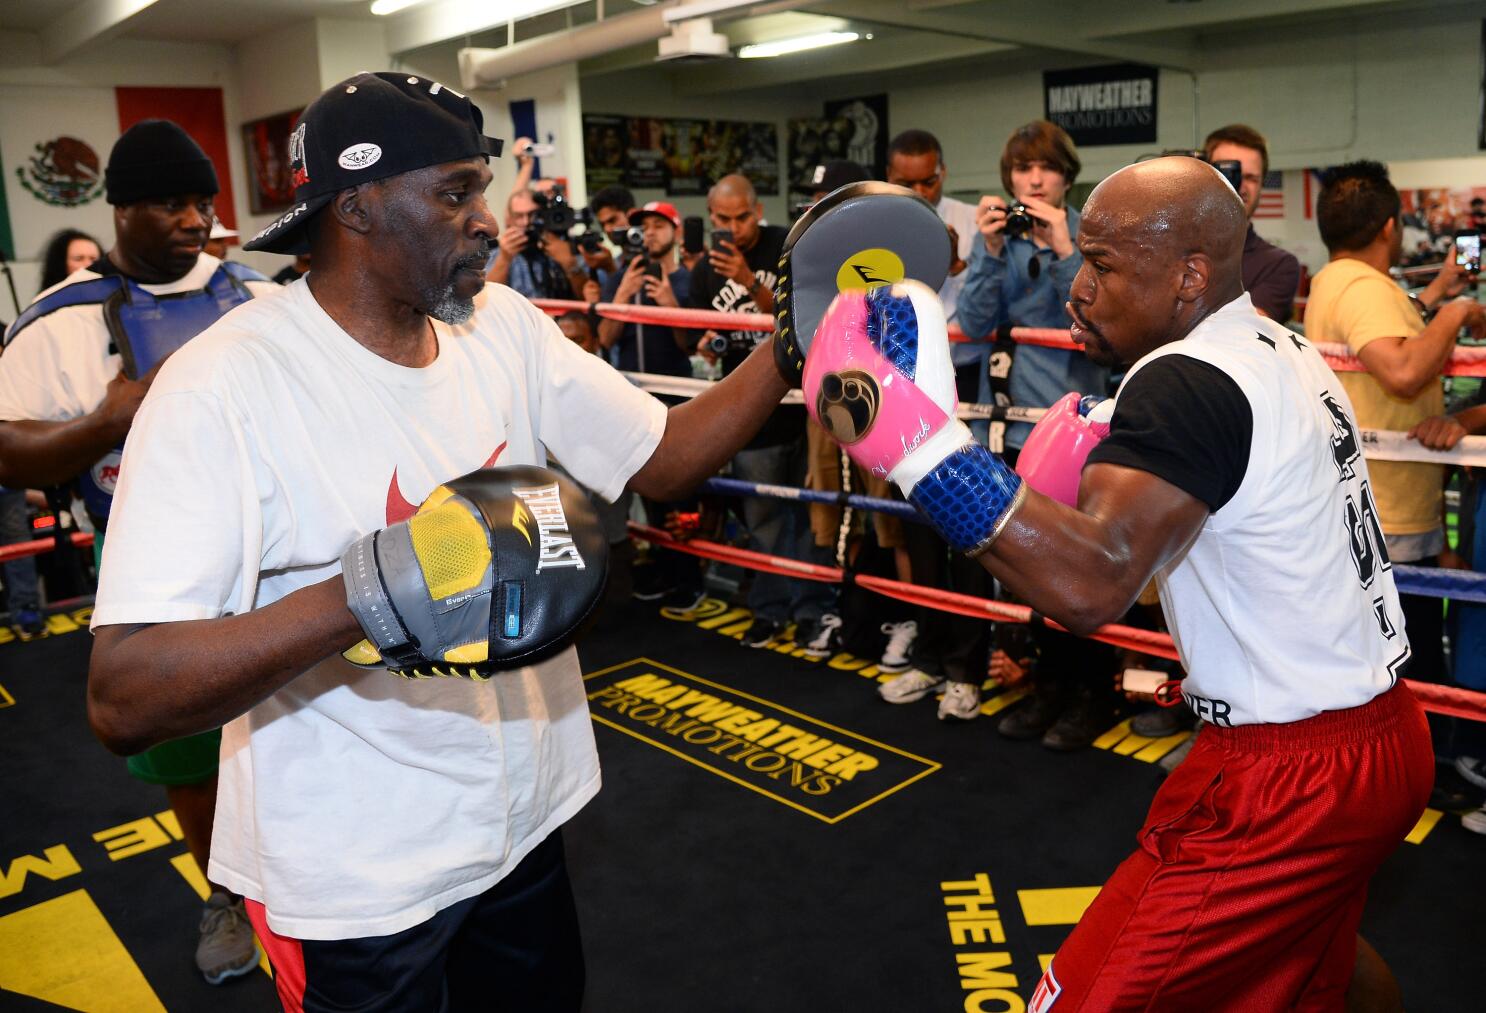 Boxing: Floyd Mayweather shows he's still got it at 46-years-old